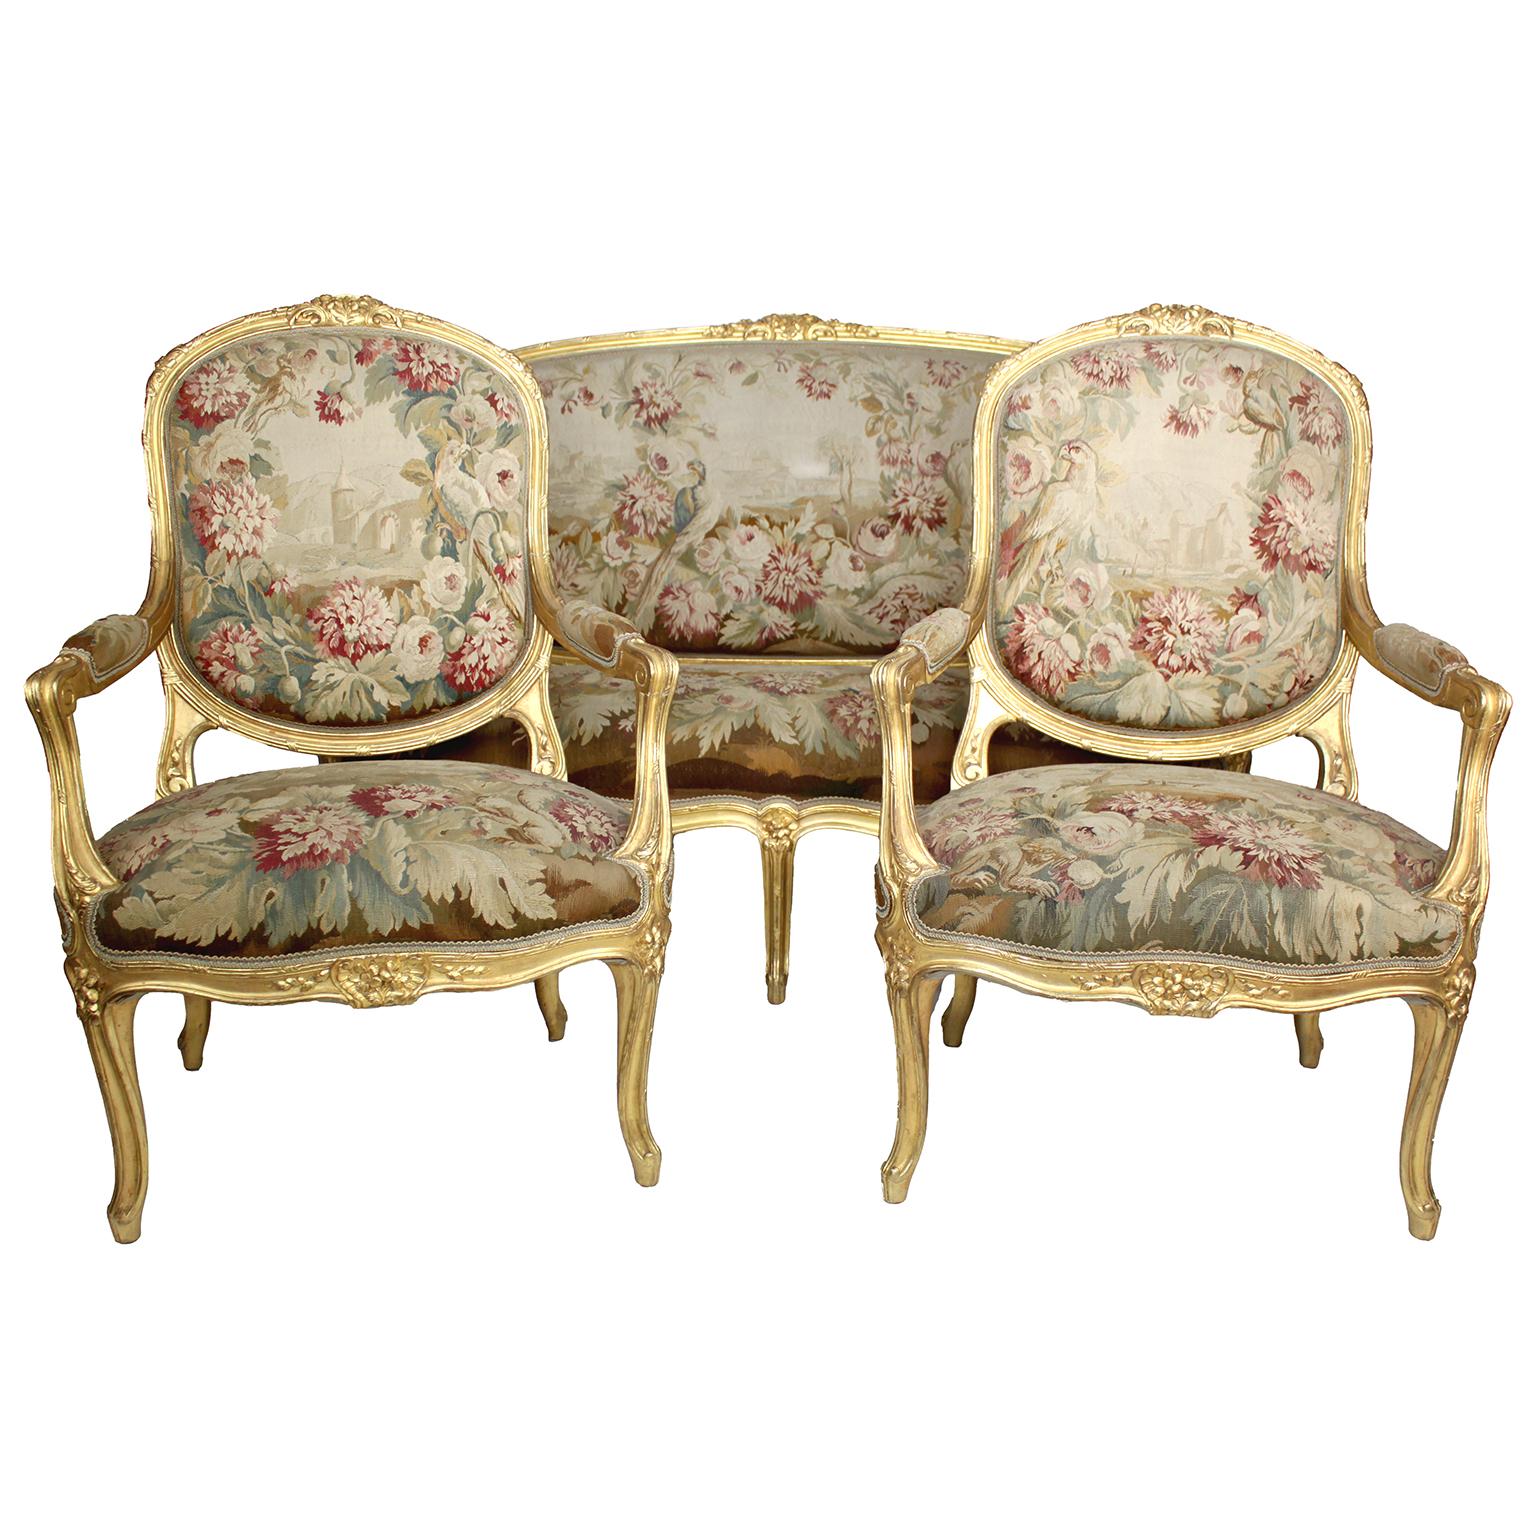 A very fine French 19th century Louis XV style three-piece giltwood carved and silk Aubusson tapestry three-piece salon suite, comprising of a settee and two fauteuils (armchairs), the Aubusson silk tapestry with a design of flowers, trees, parrots